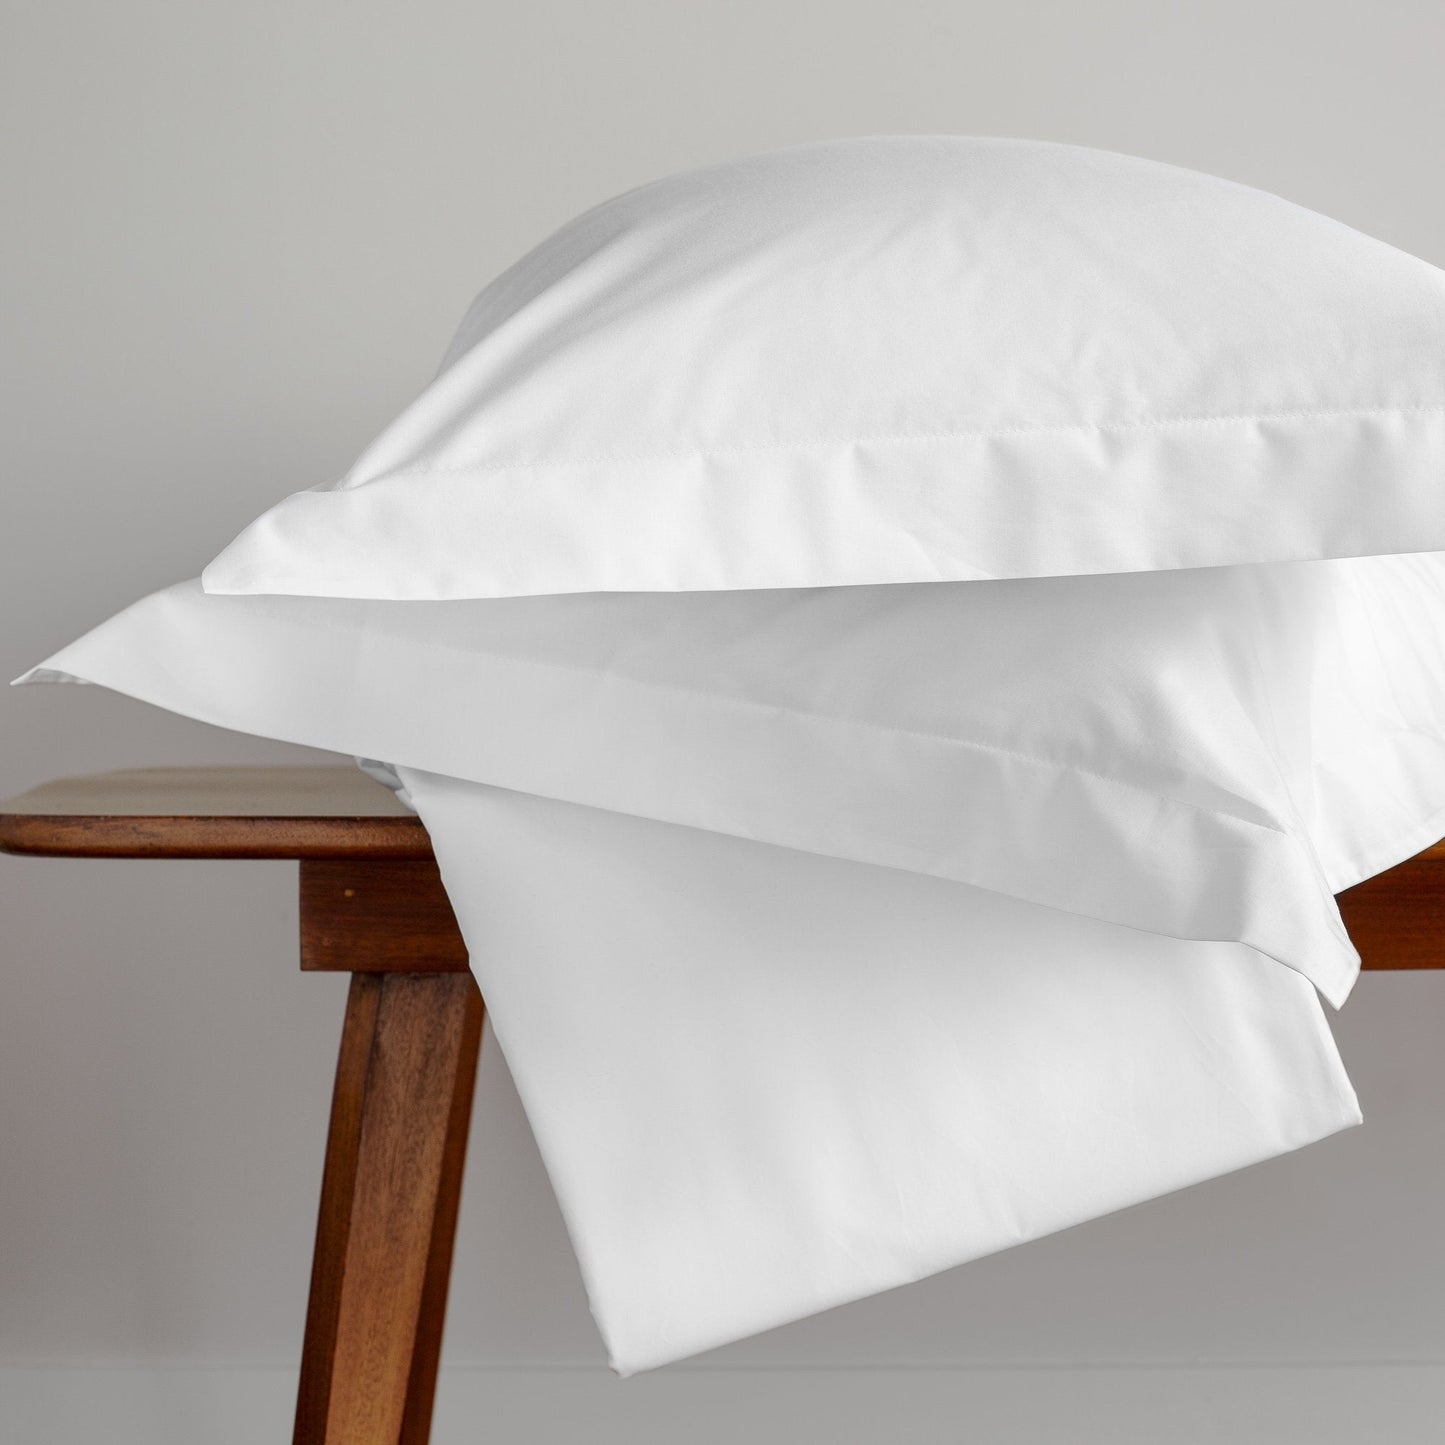 Fitted Sheets: The Egyptian Hotel Sheet